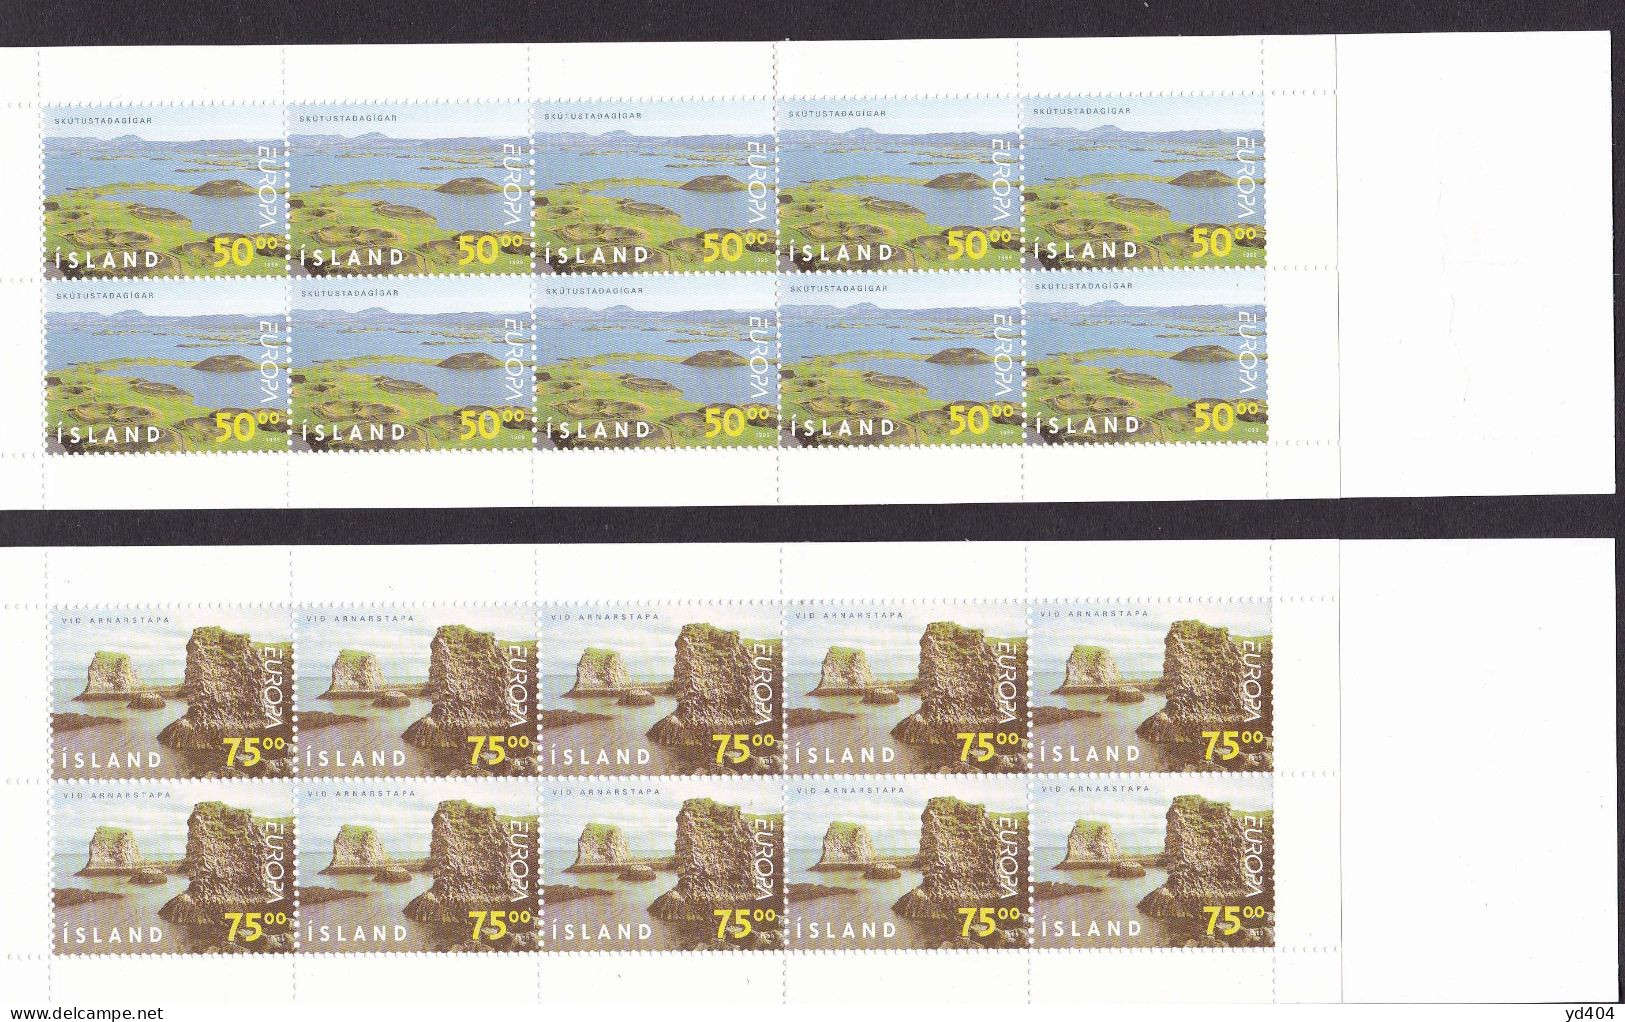 IS672 – ISLANDE - ICELAND - BOOKLETS - 1999 - EUROPA - Y&T # C866/67 MNH 57 € - Booklets